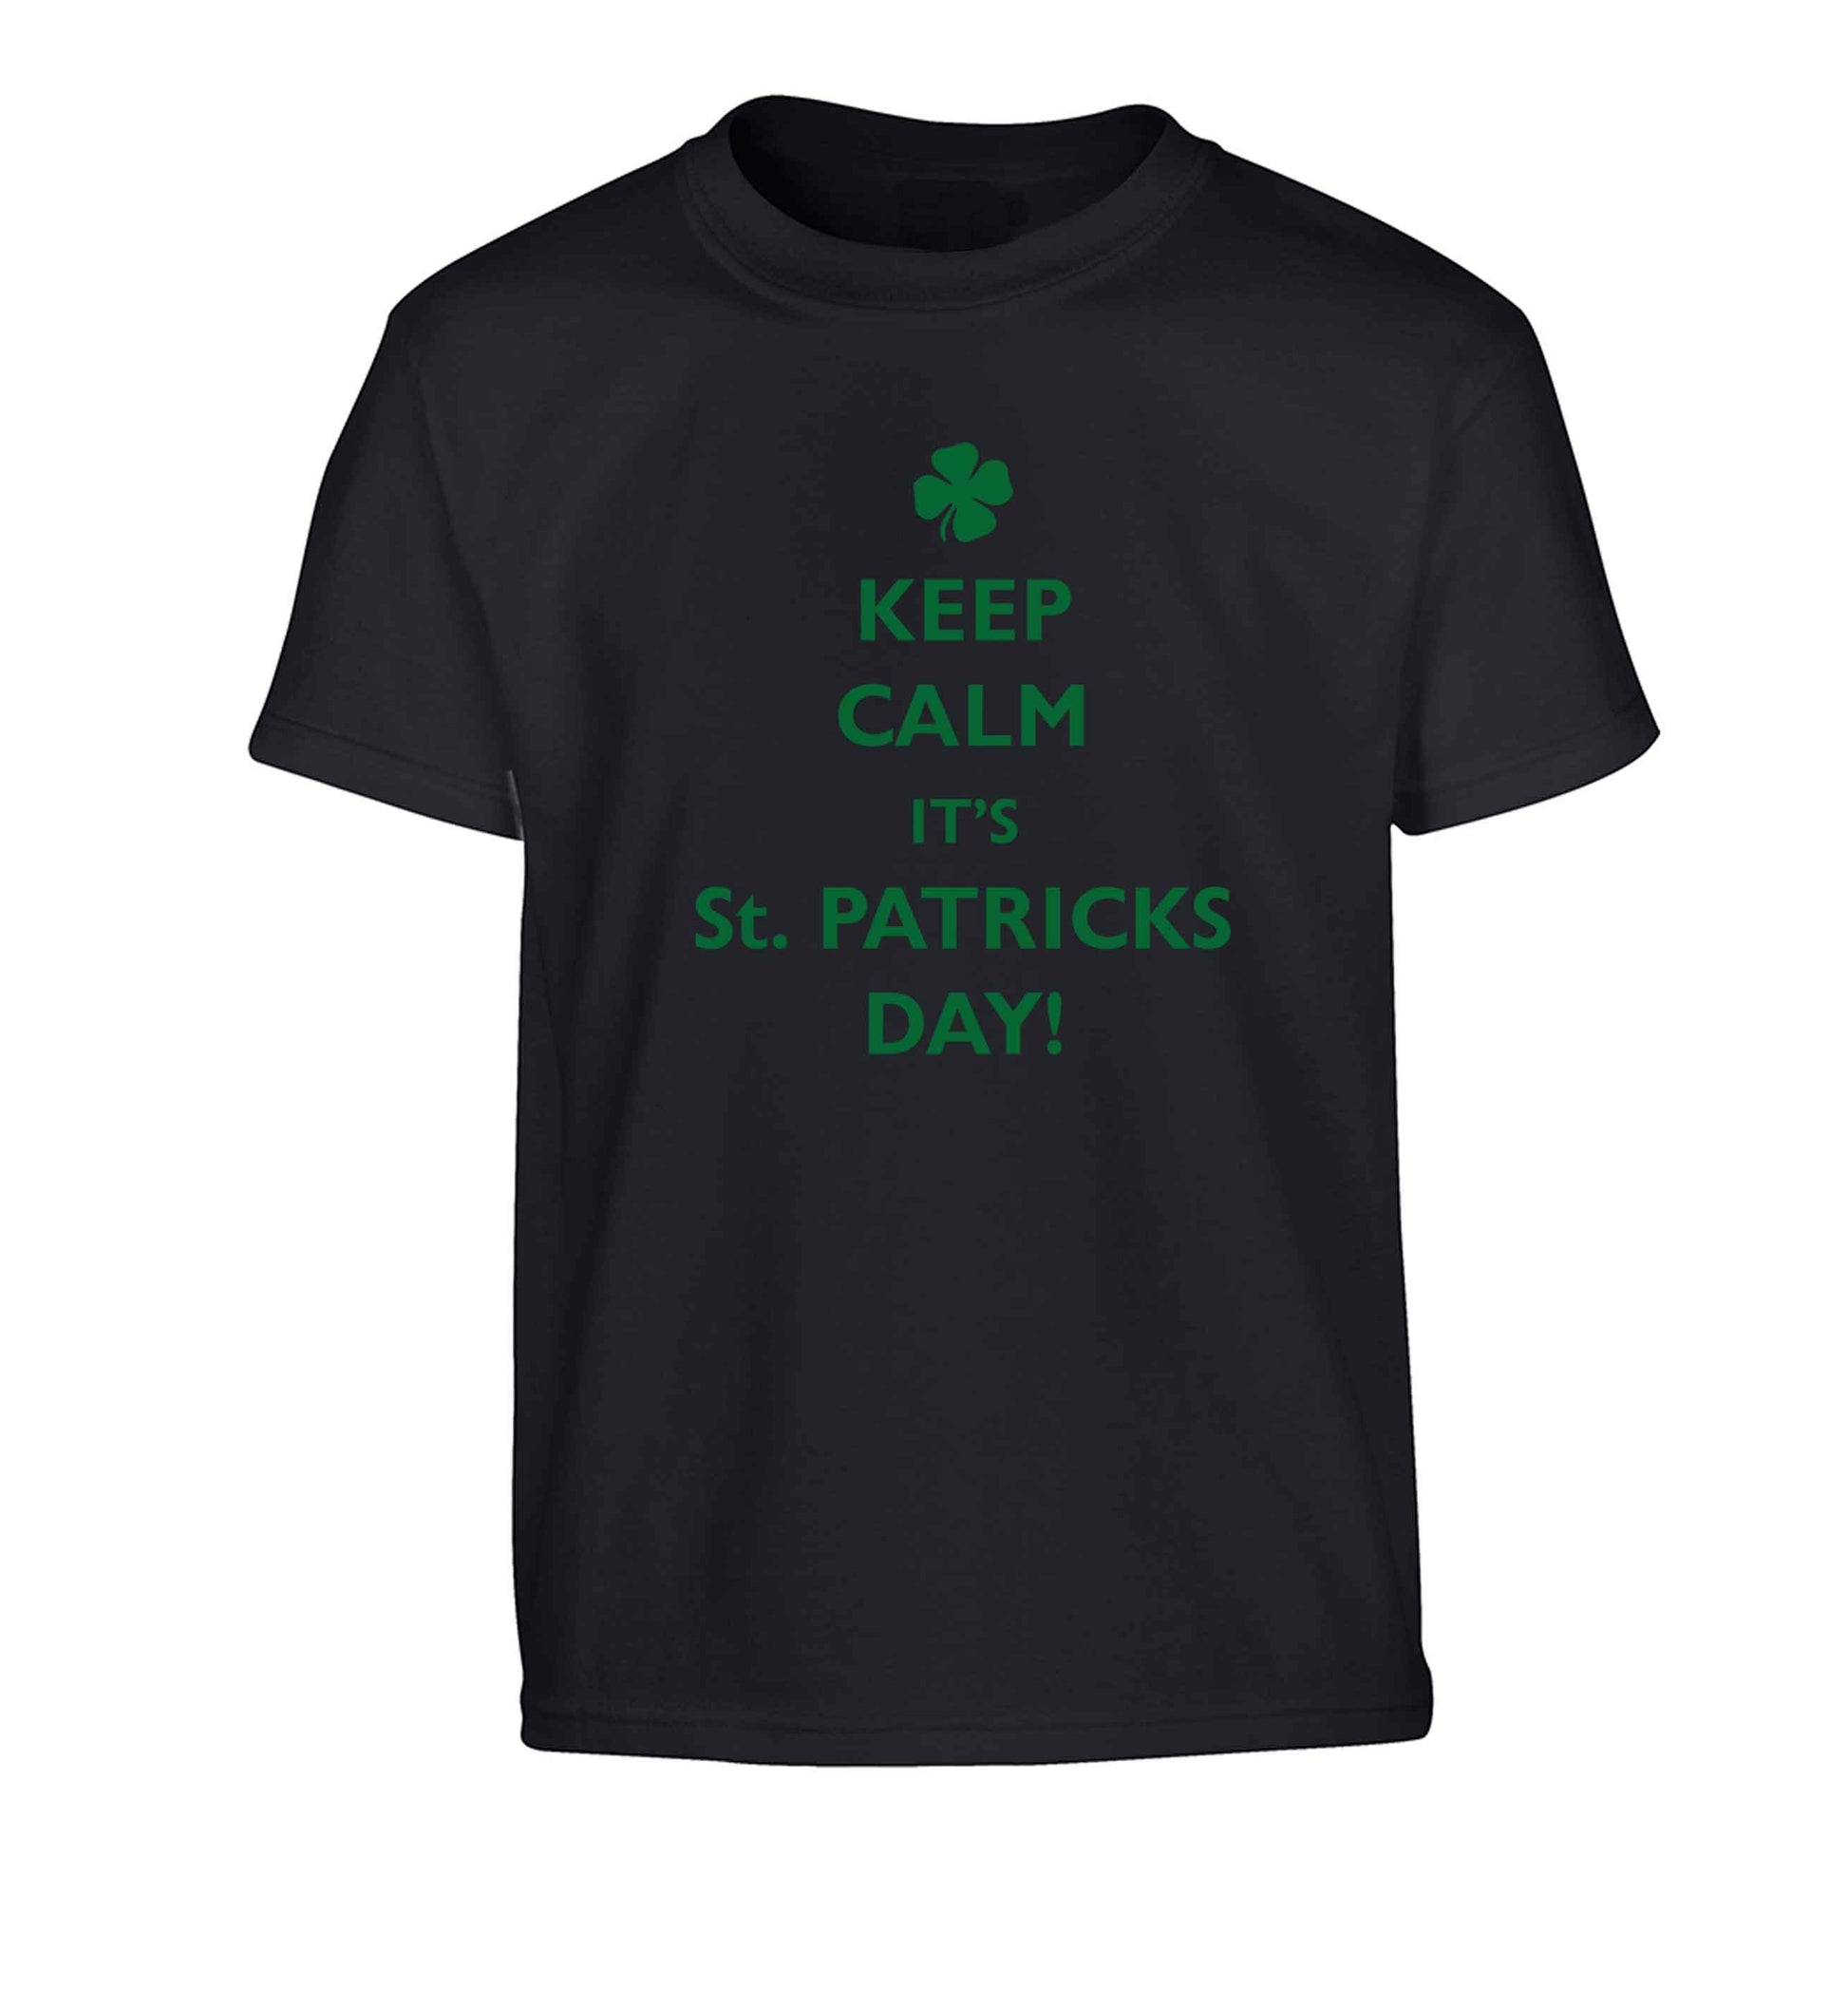 I can't keep calm it's St.Patricks day Children's black Tshirt 12-13 Years